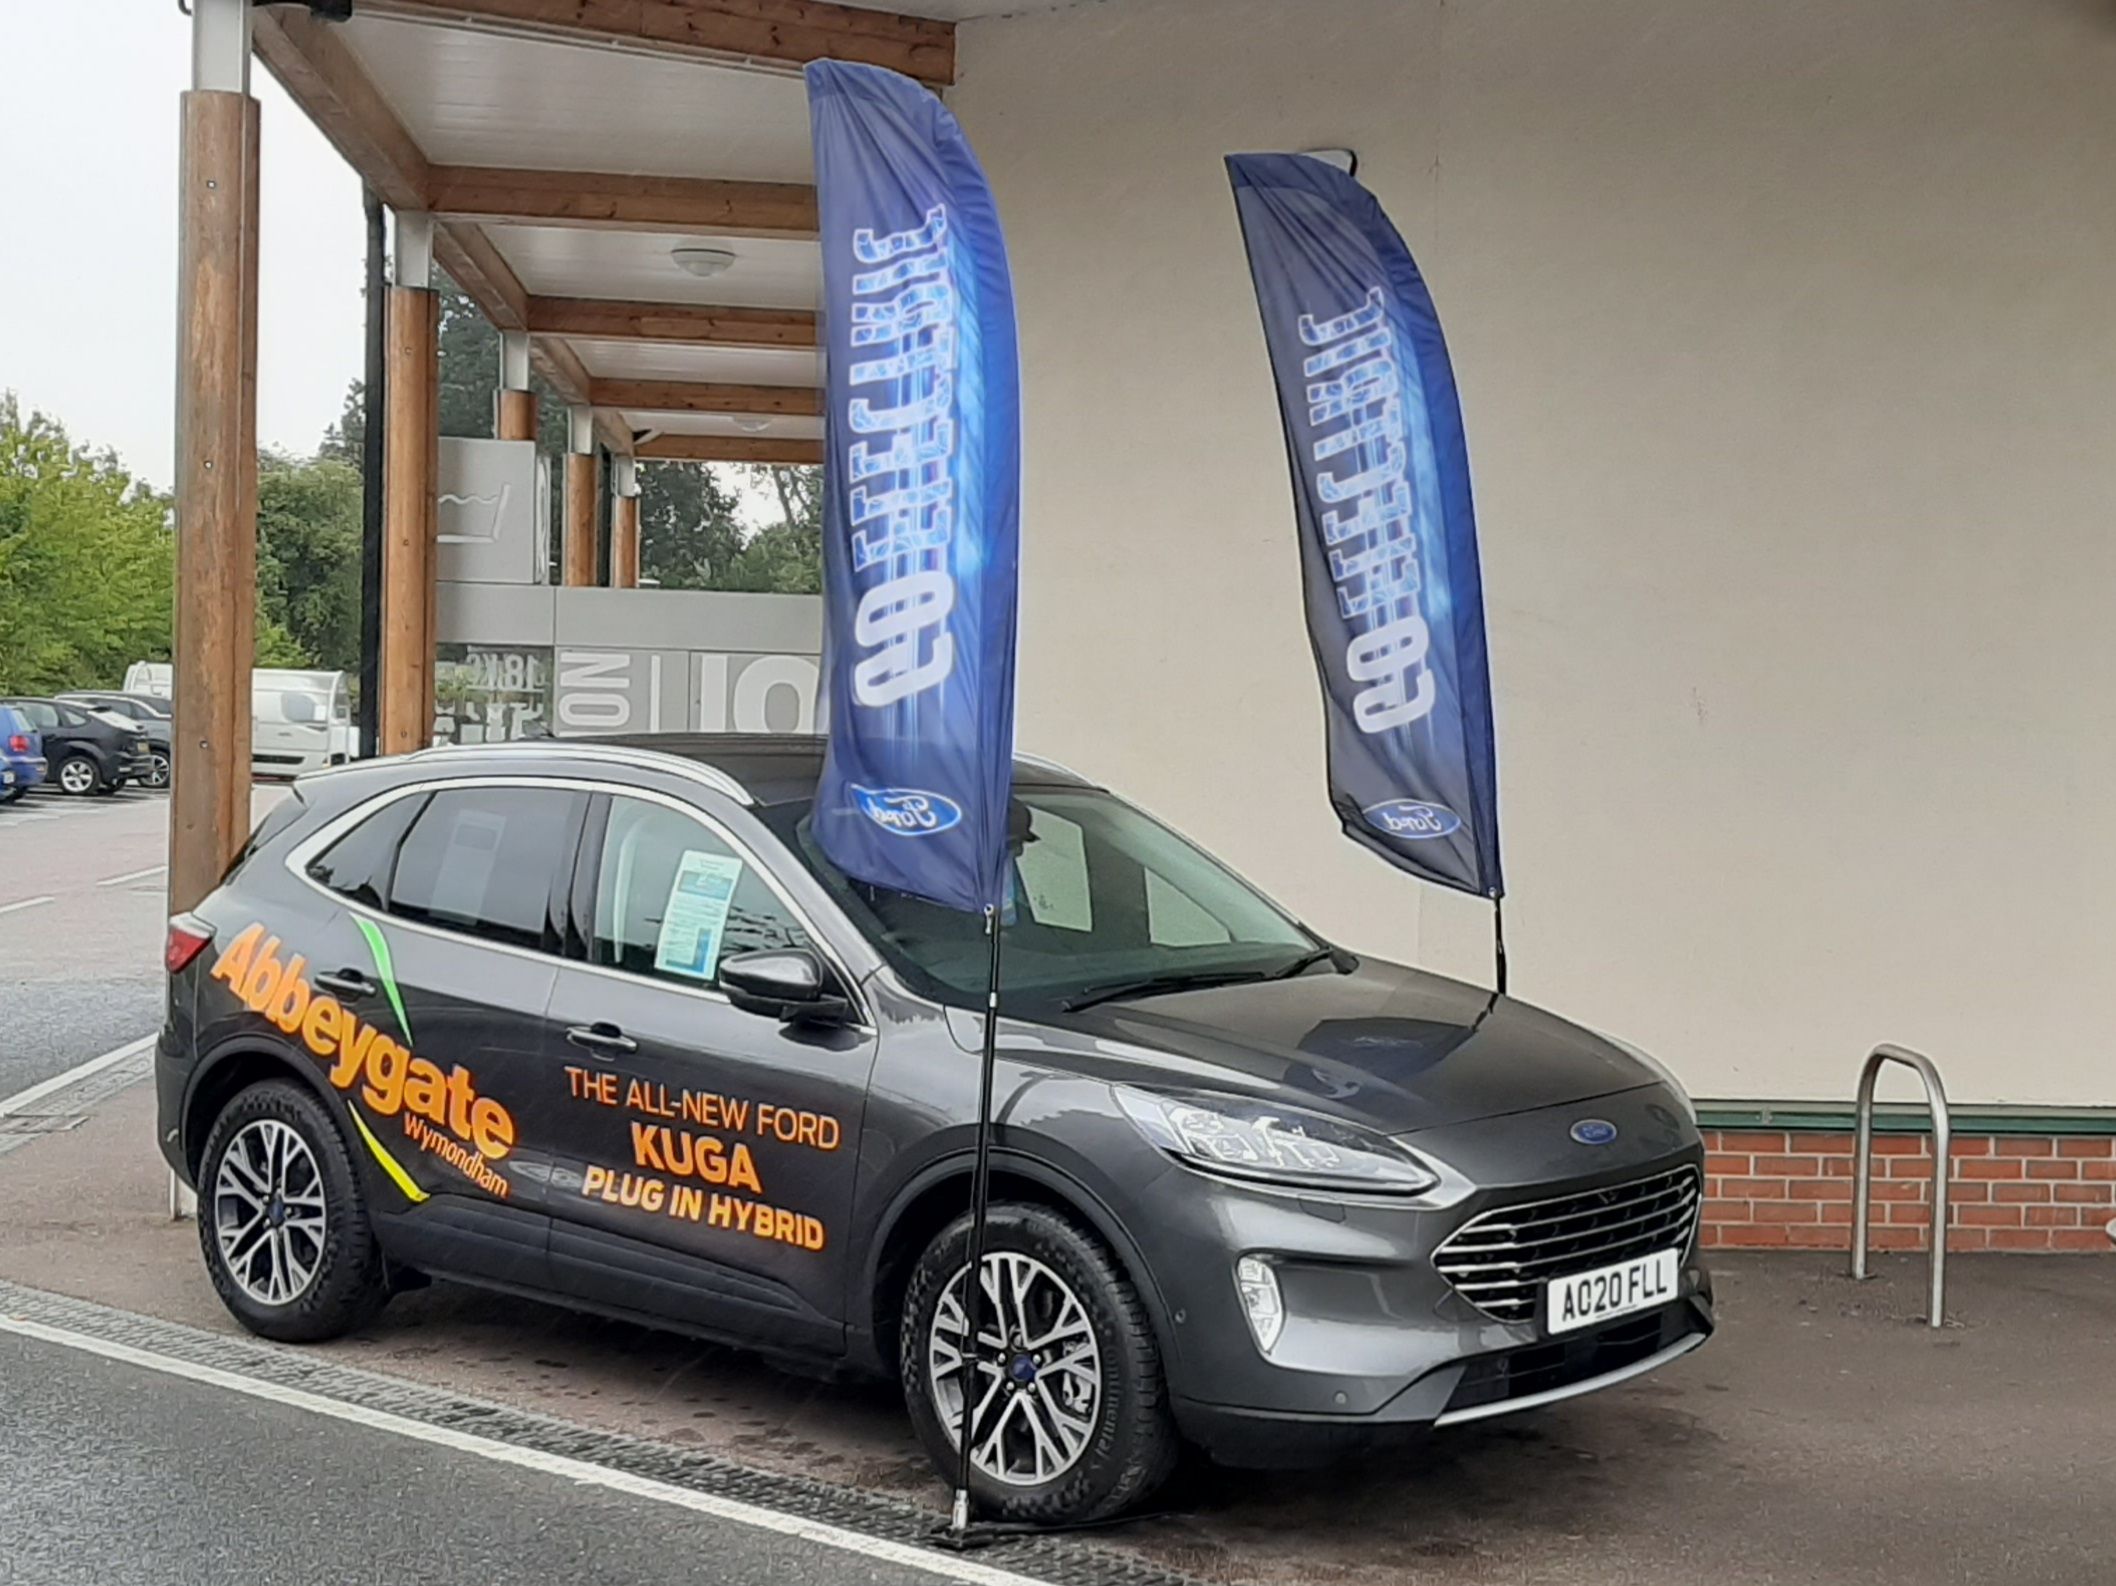 The All-New Ford Kuga PHEV at Morrisons  in Wymondham